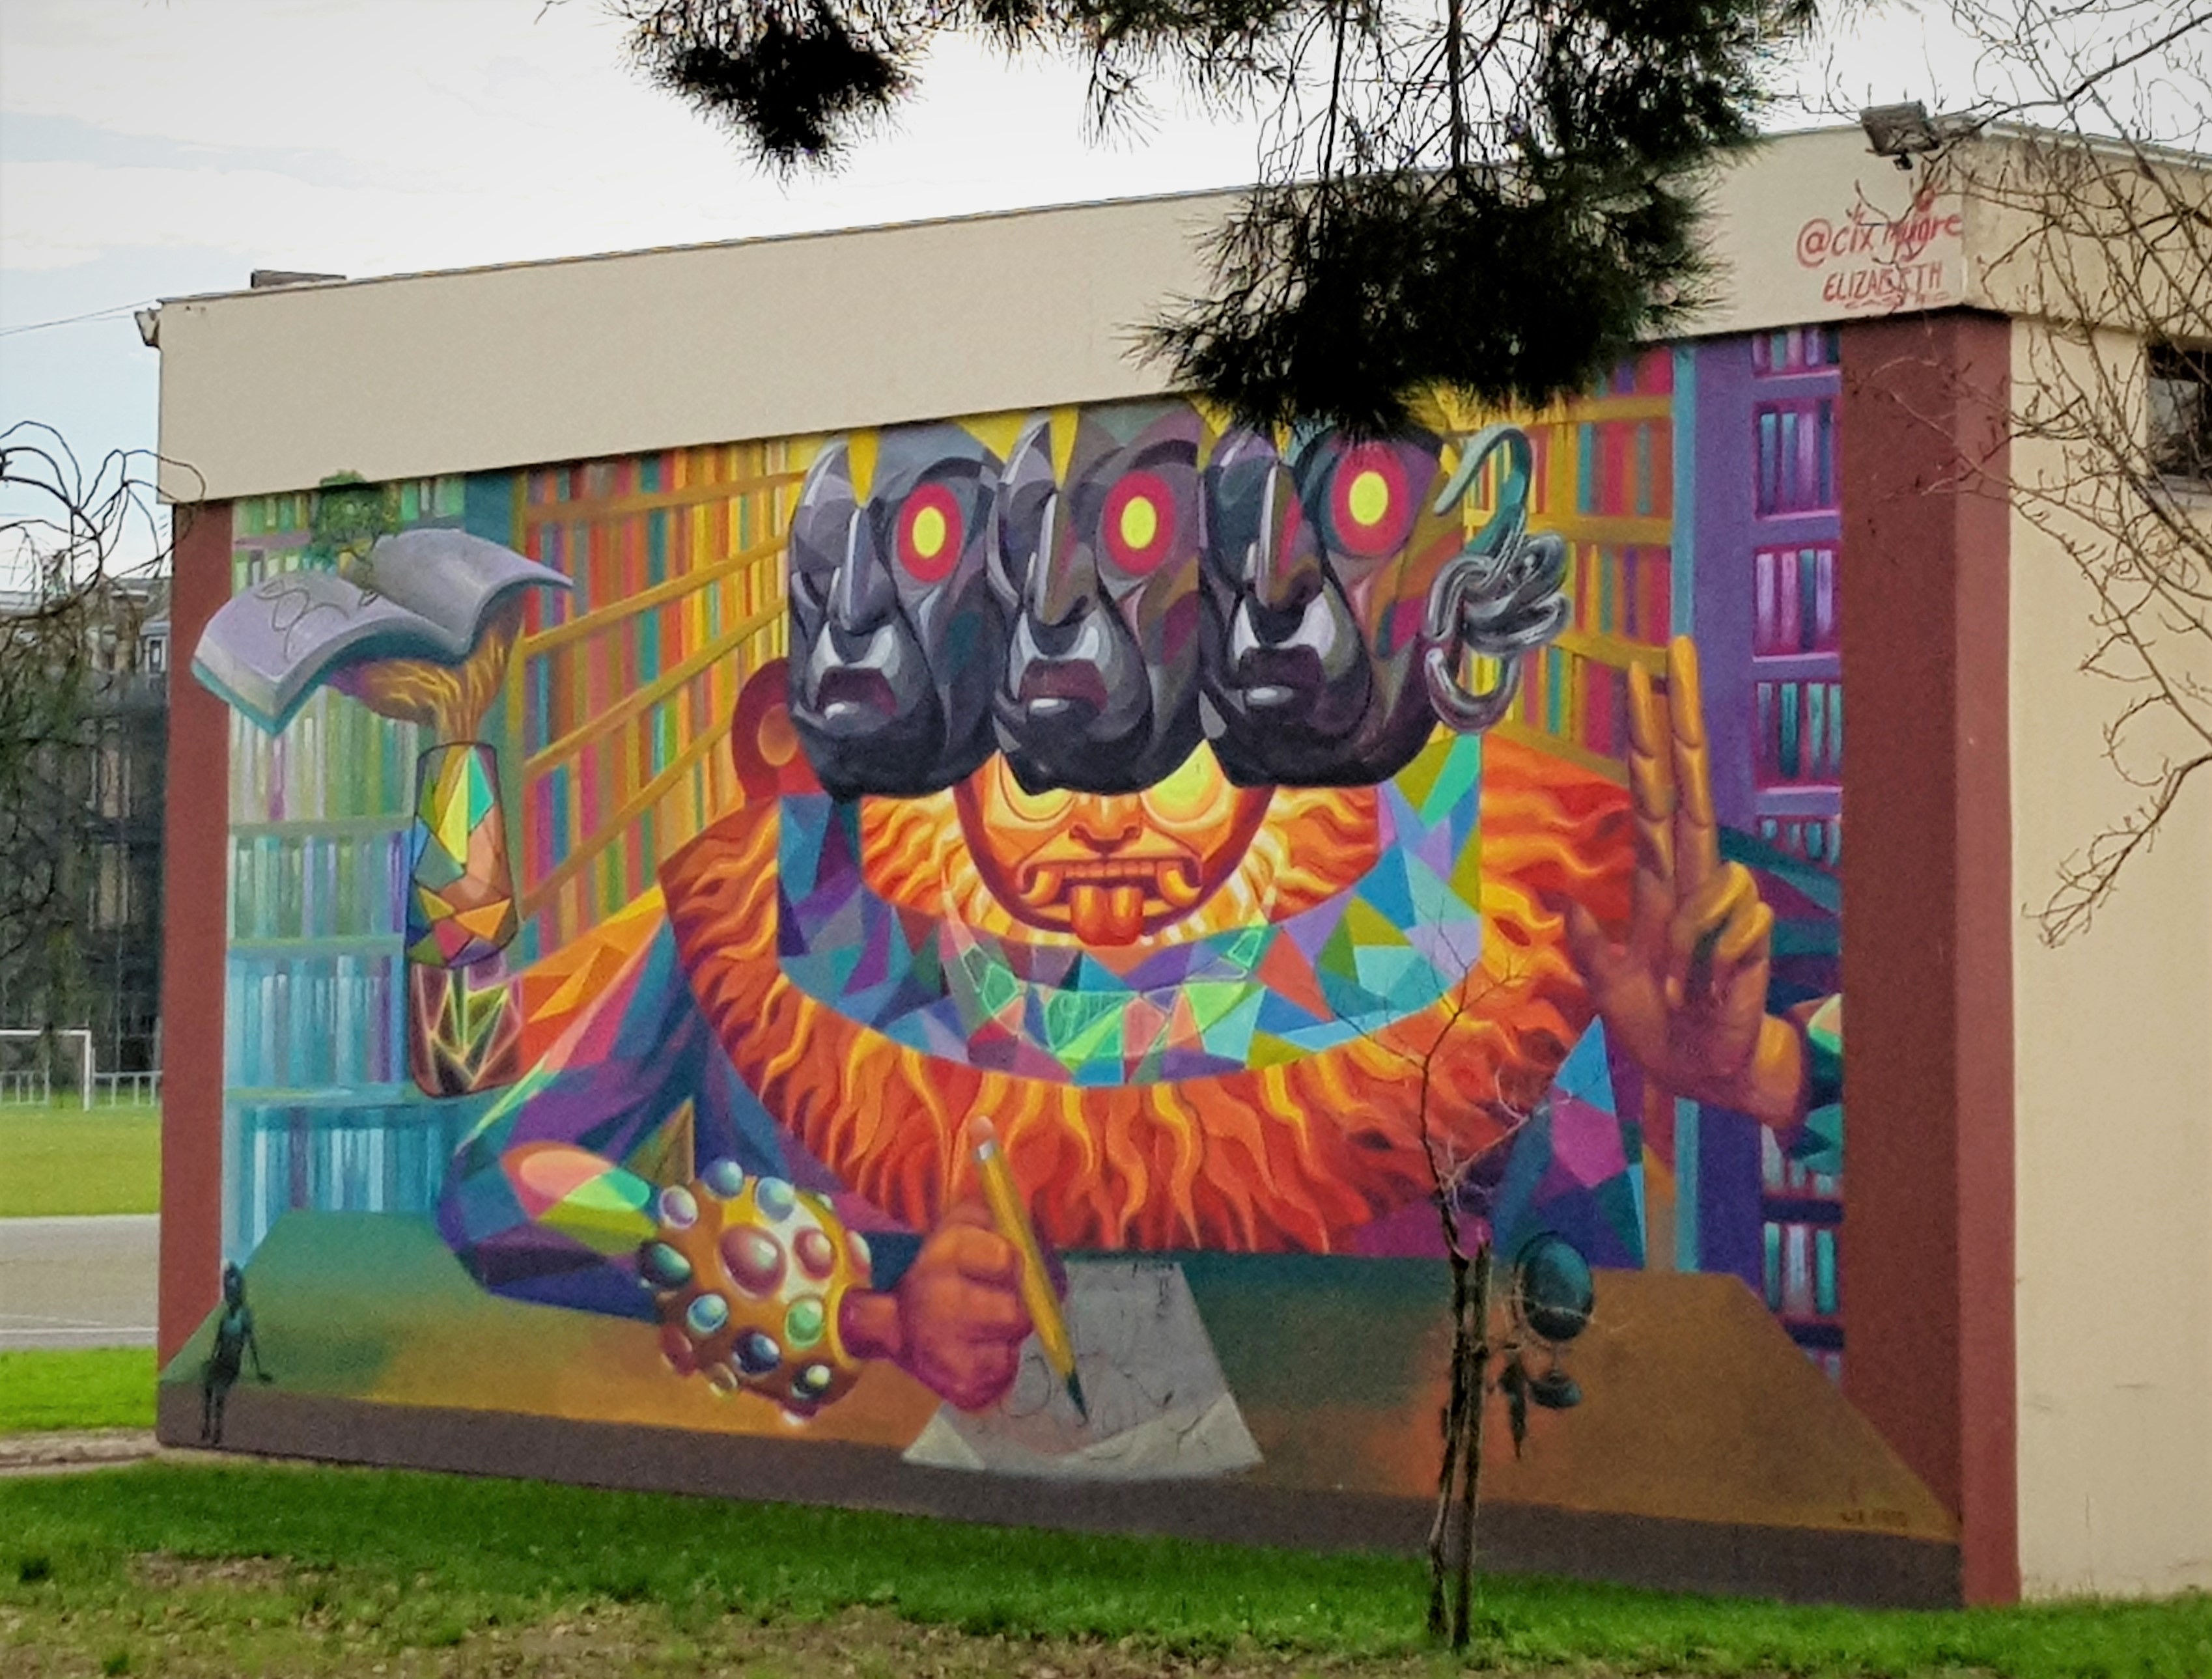 Graffiti 6862  by the artist Cix Mugre captured by Mephisroth in Talence France